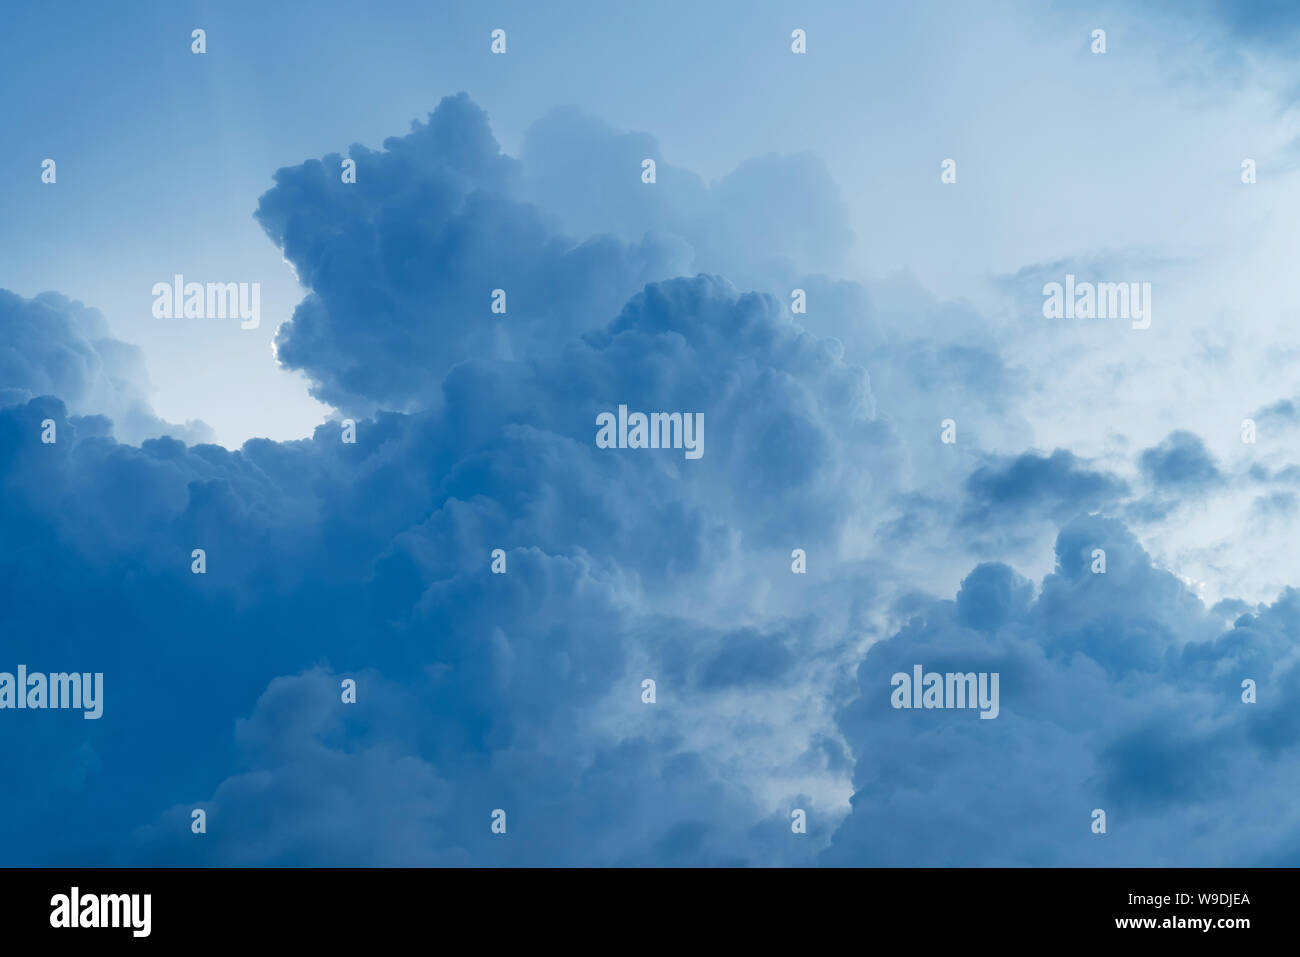 Dramatic nature sky with storm cloud before raining background Stock Photo